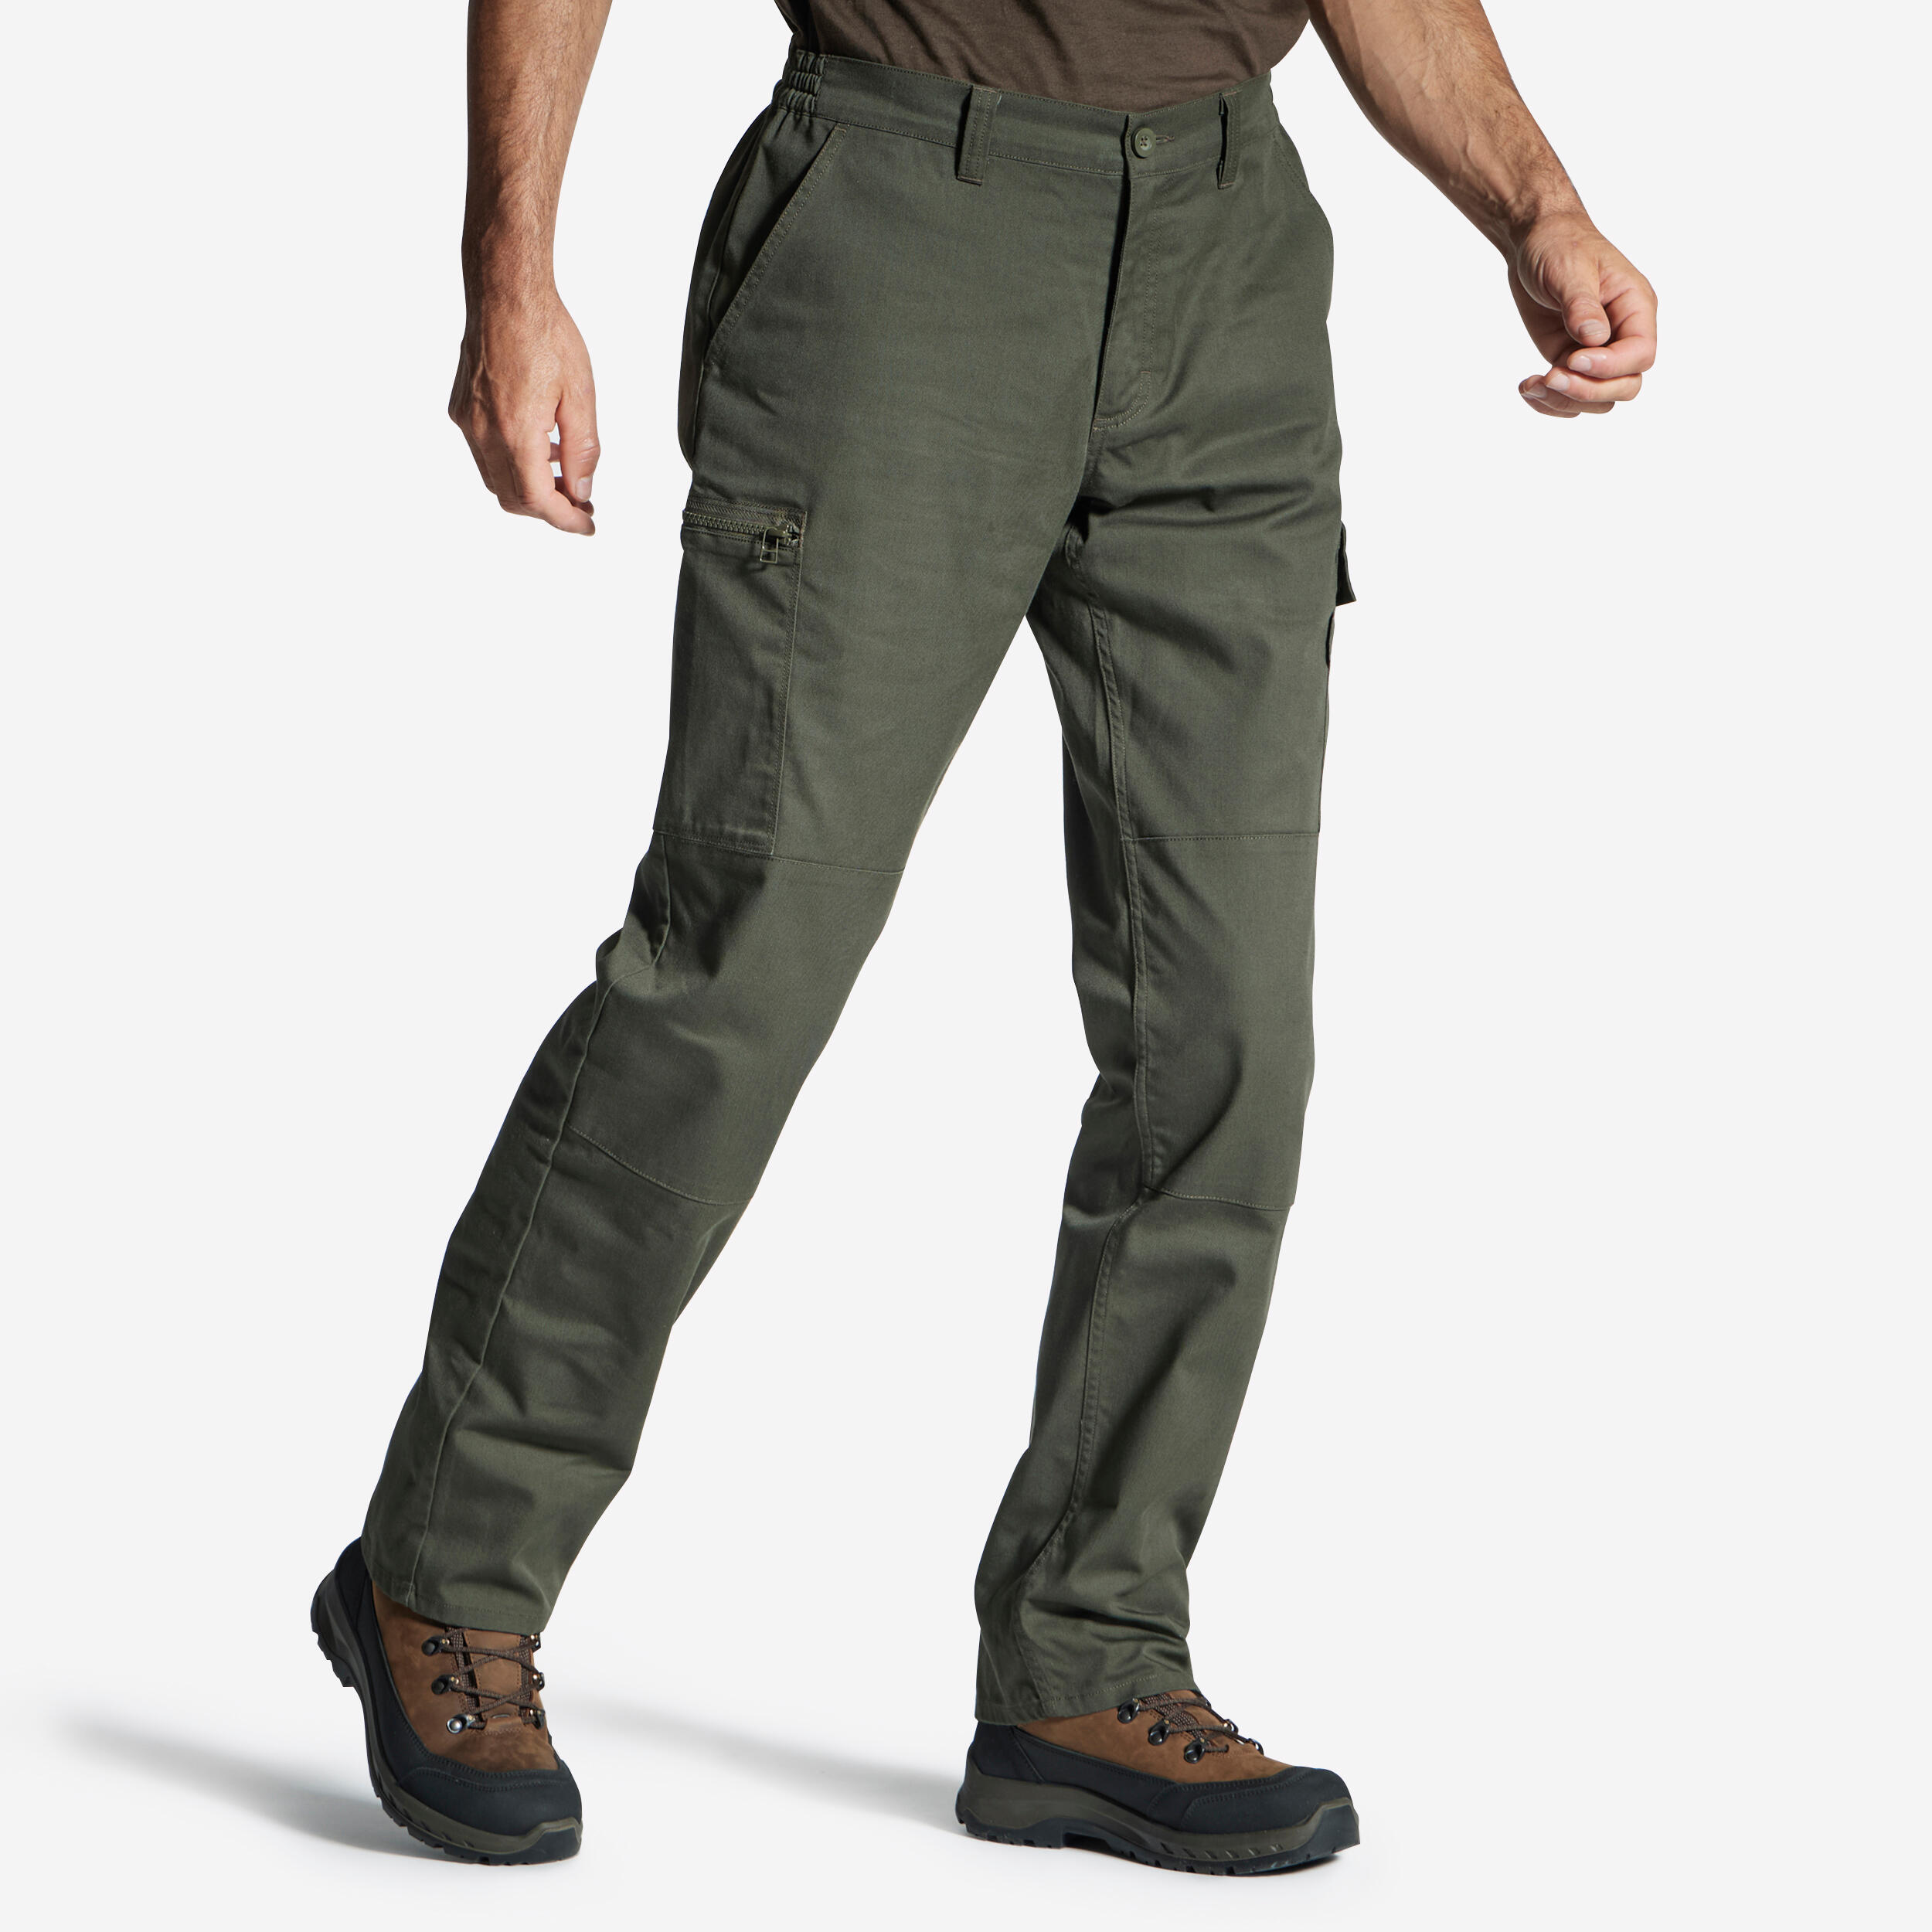 Durable Cargo Trousers - Steppe 300 2-Tone - Dark ivy green